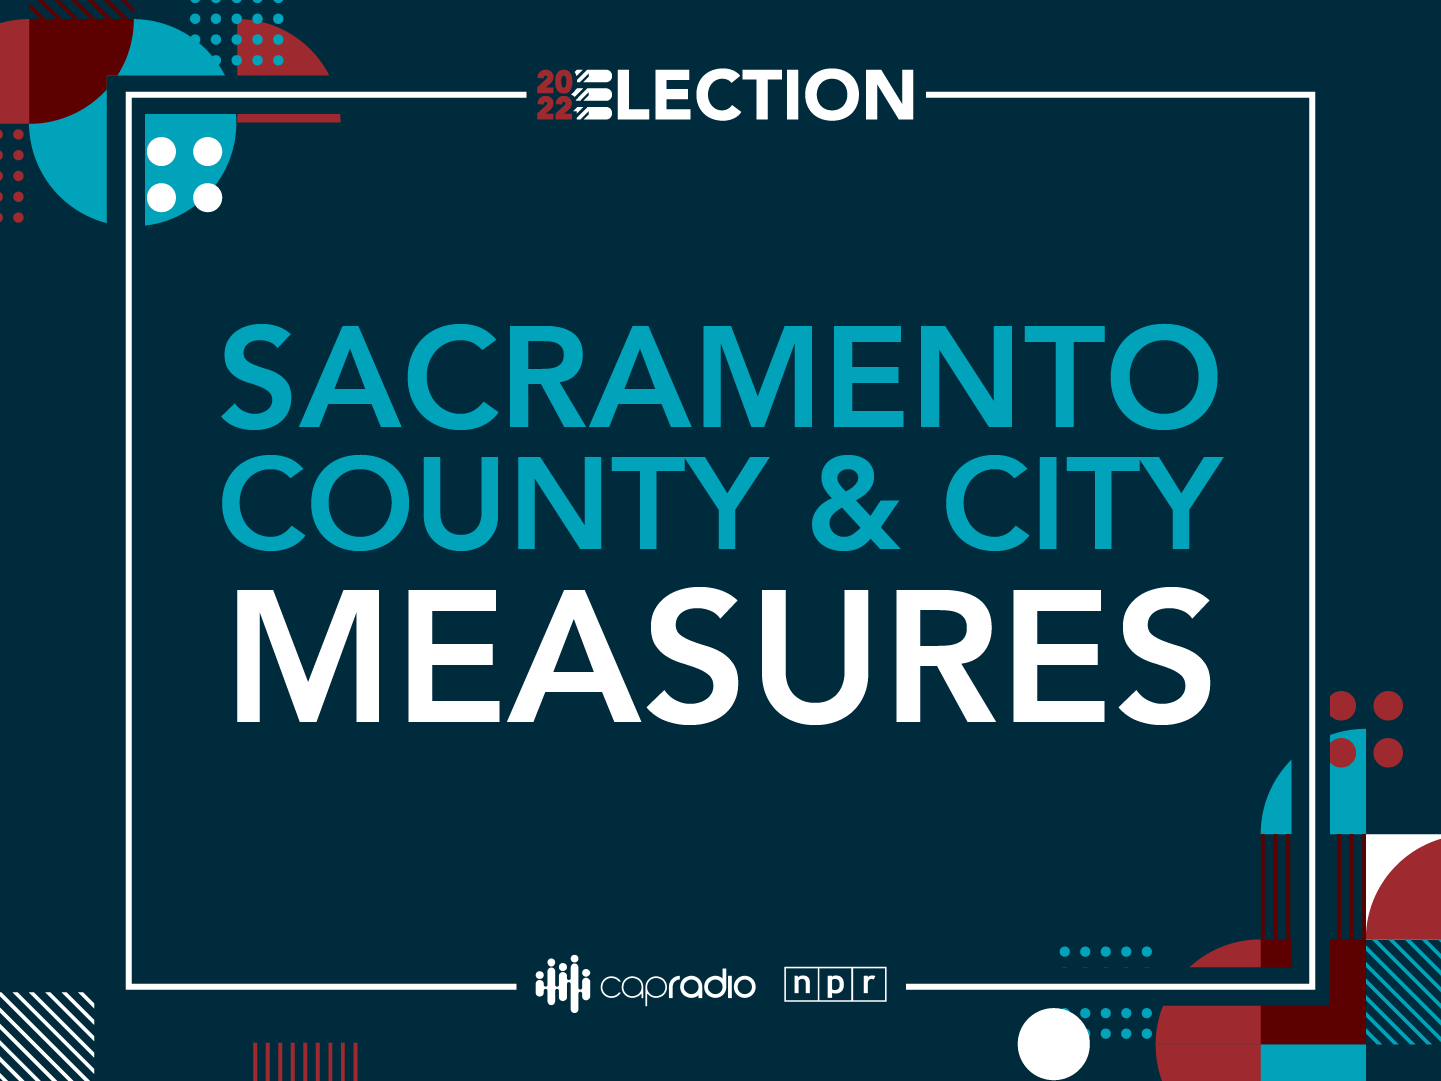 What's on the ballot? A look at 2022 Sacramento county and city ballot